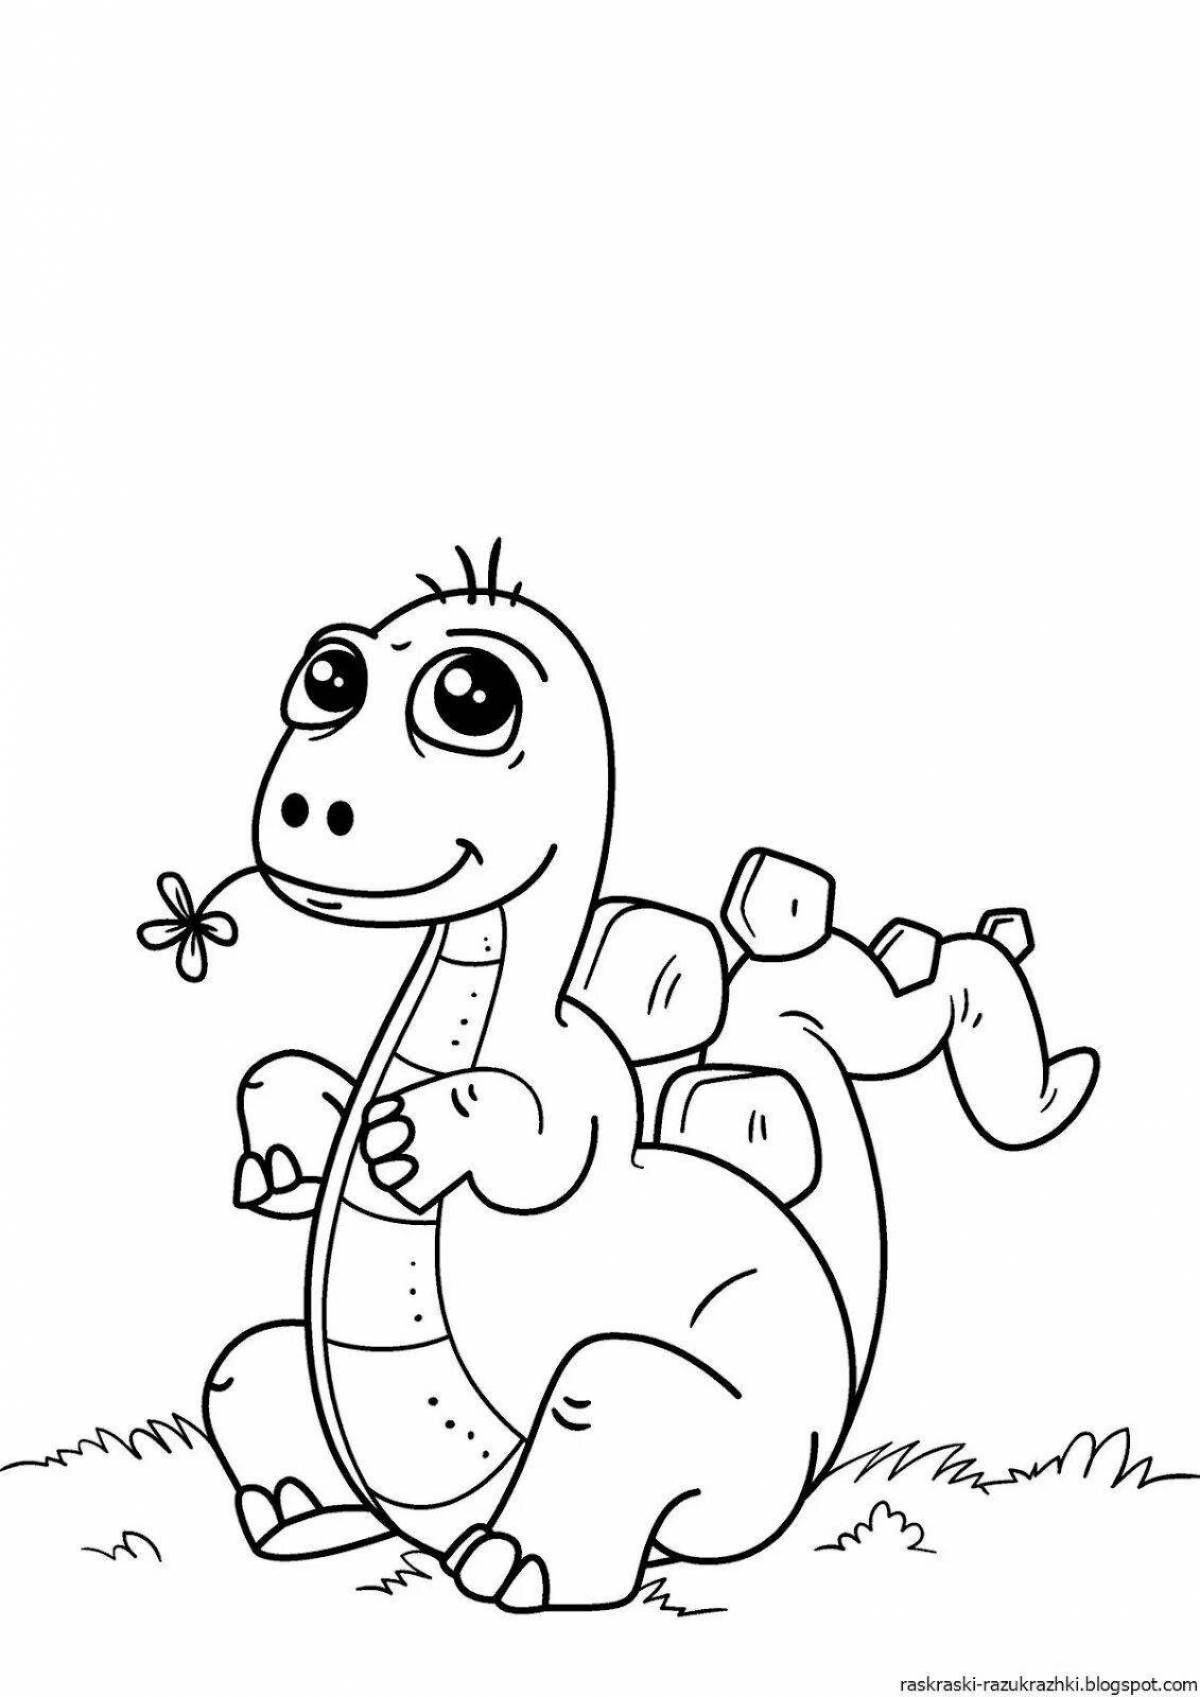 Awesome dino coloring page